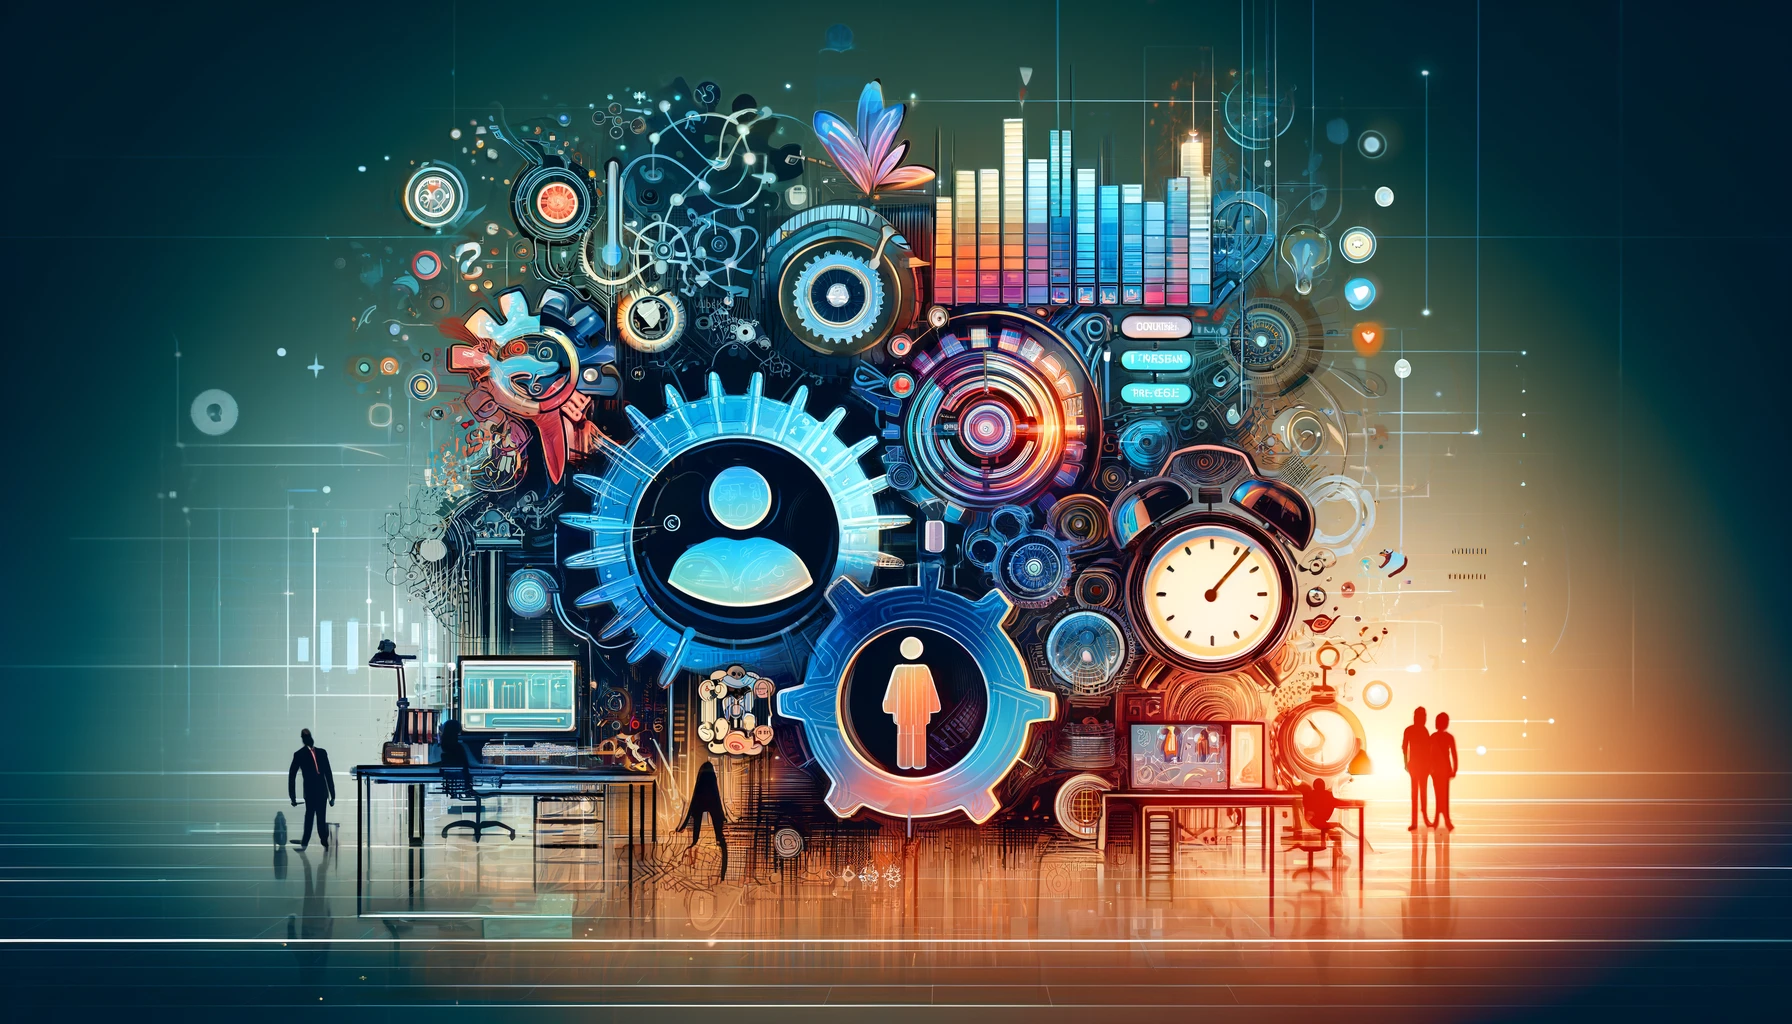 An abstract artistic illustration representing human resources automation, featuring gears, a clock, and a person icon to symbolize business automation tools and scaling with automation.